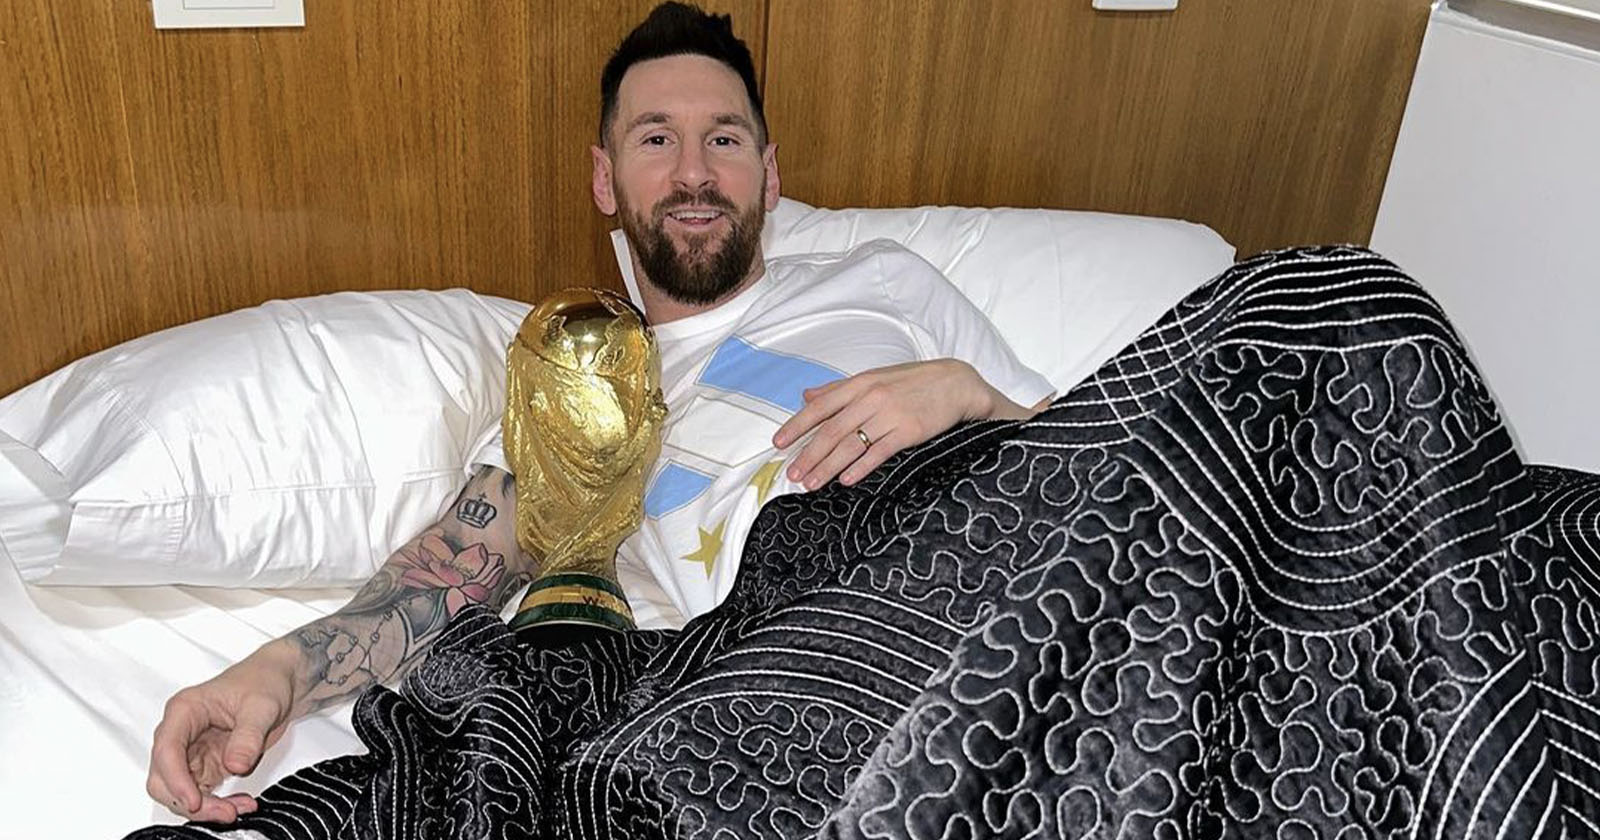 Lionel Messi's World Cup photos are most-liked Instagram post ever